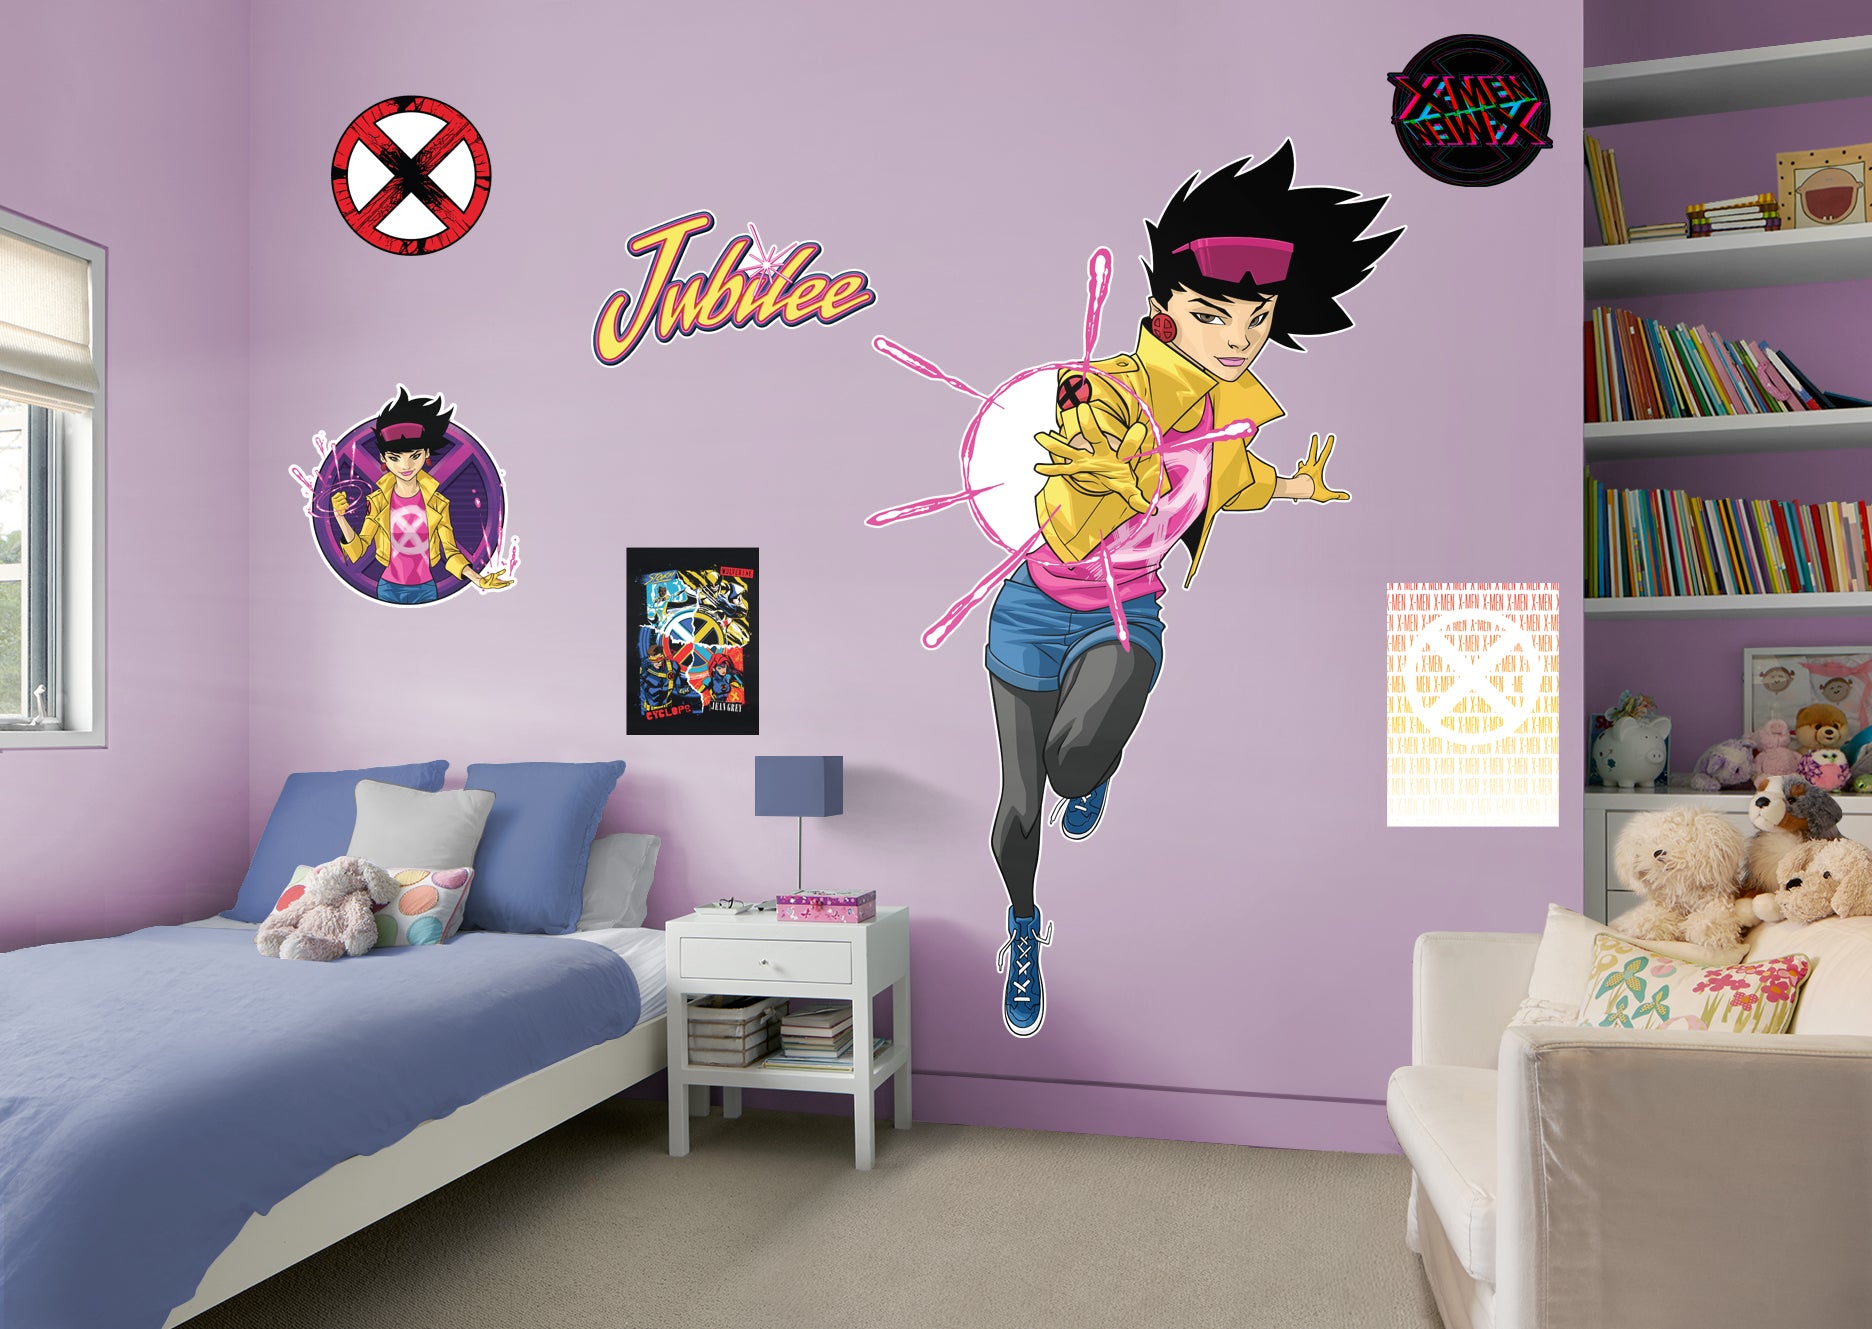 X-Men Jubilee RealBig - Officially Licensed Marvel Removable Wall Decal Life-Size Character + 6 Decals (47"W x 78"H) by Fathead